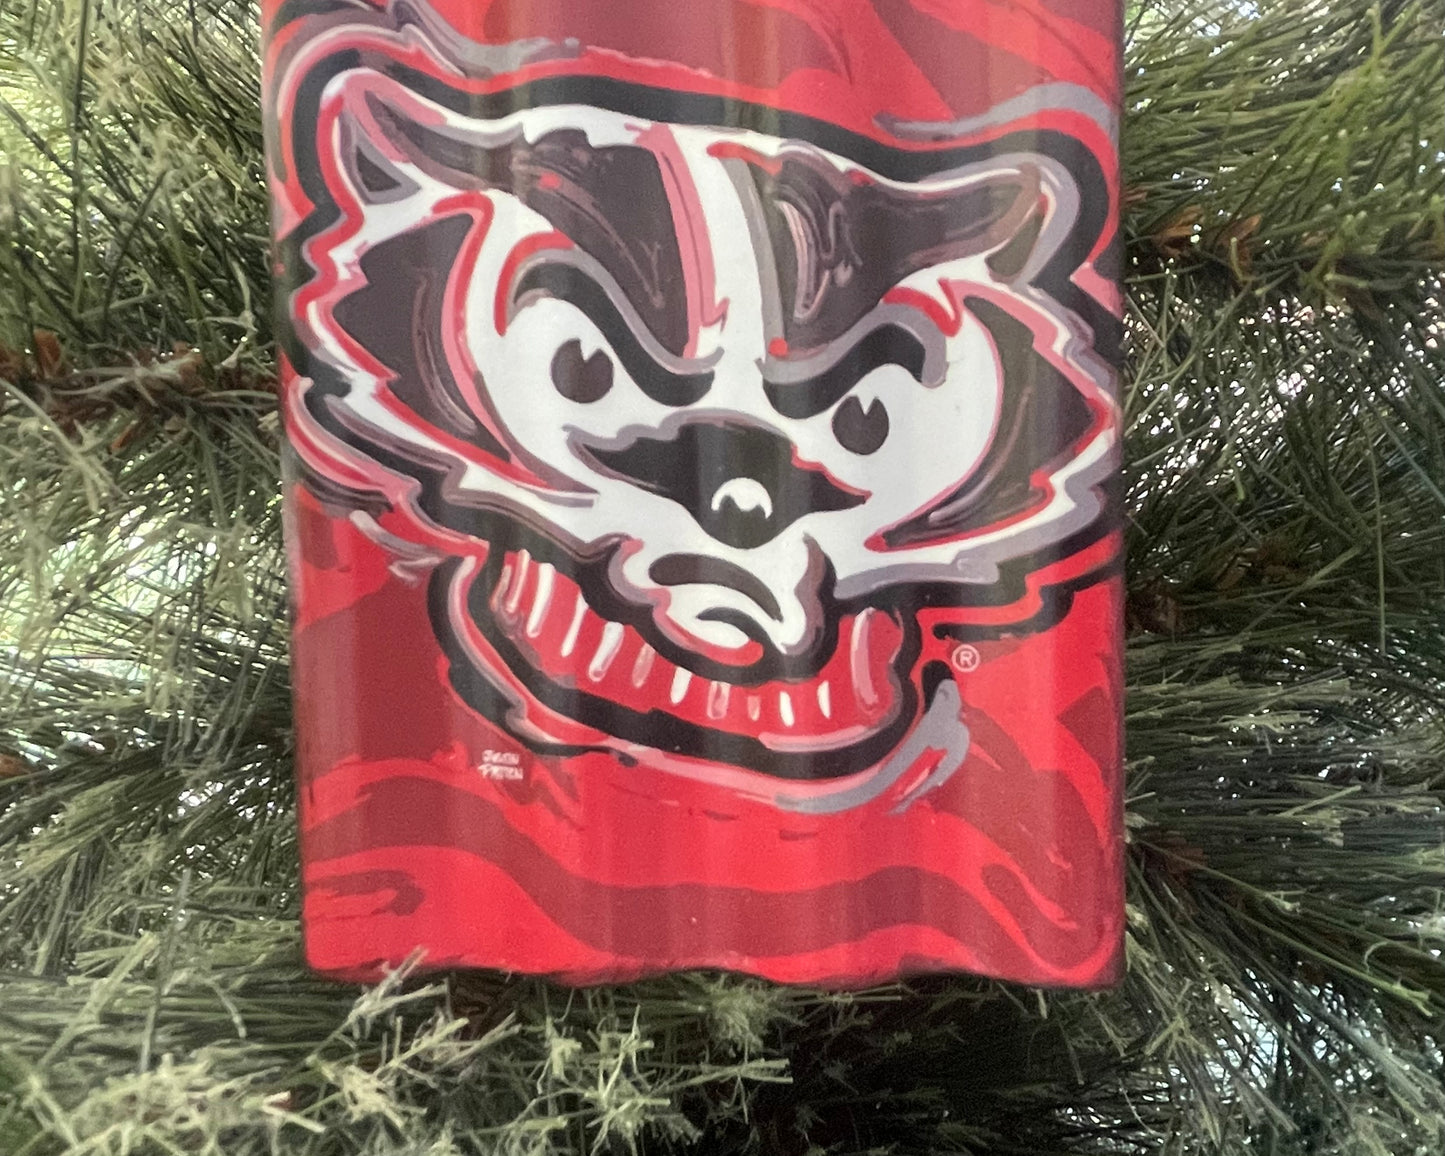 University of Wisconsin Metal Ornament by Justin Patten